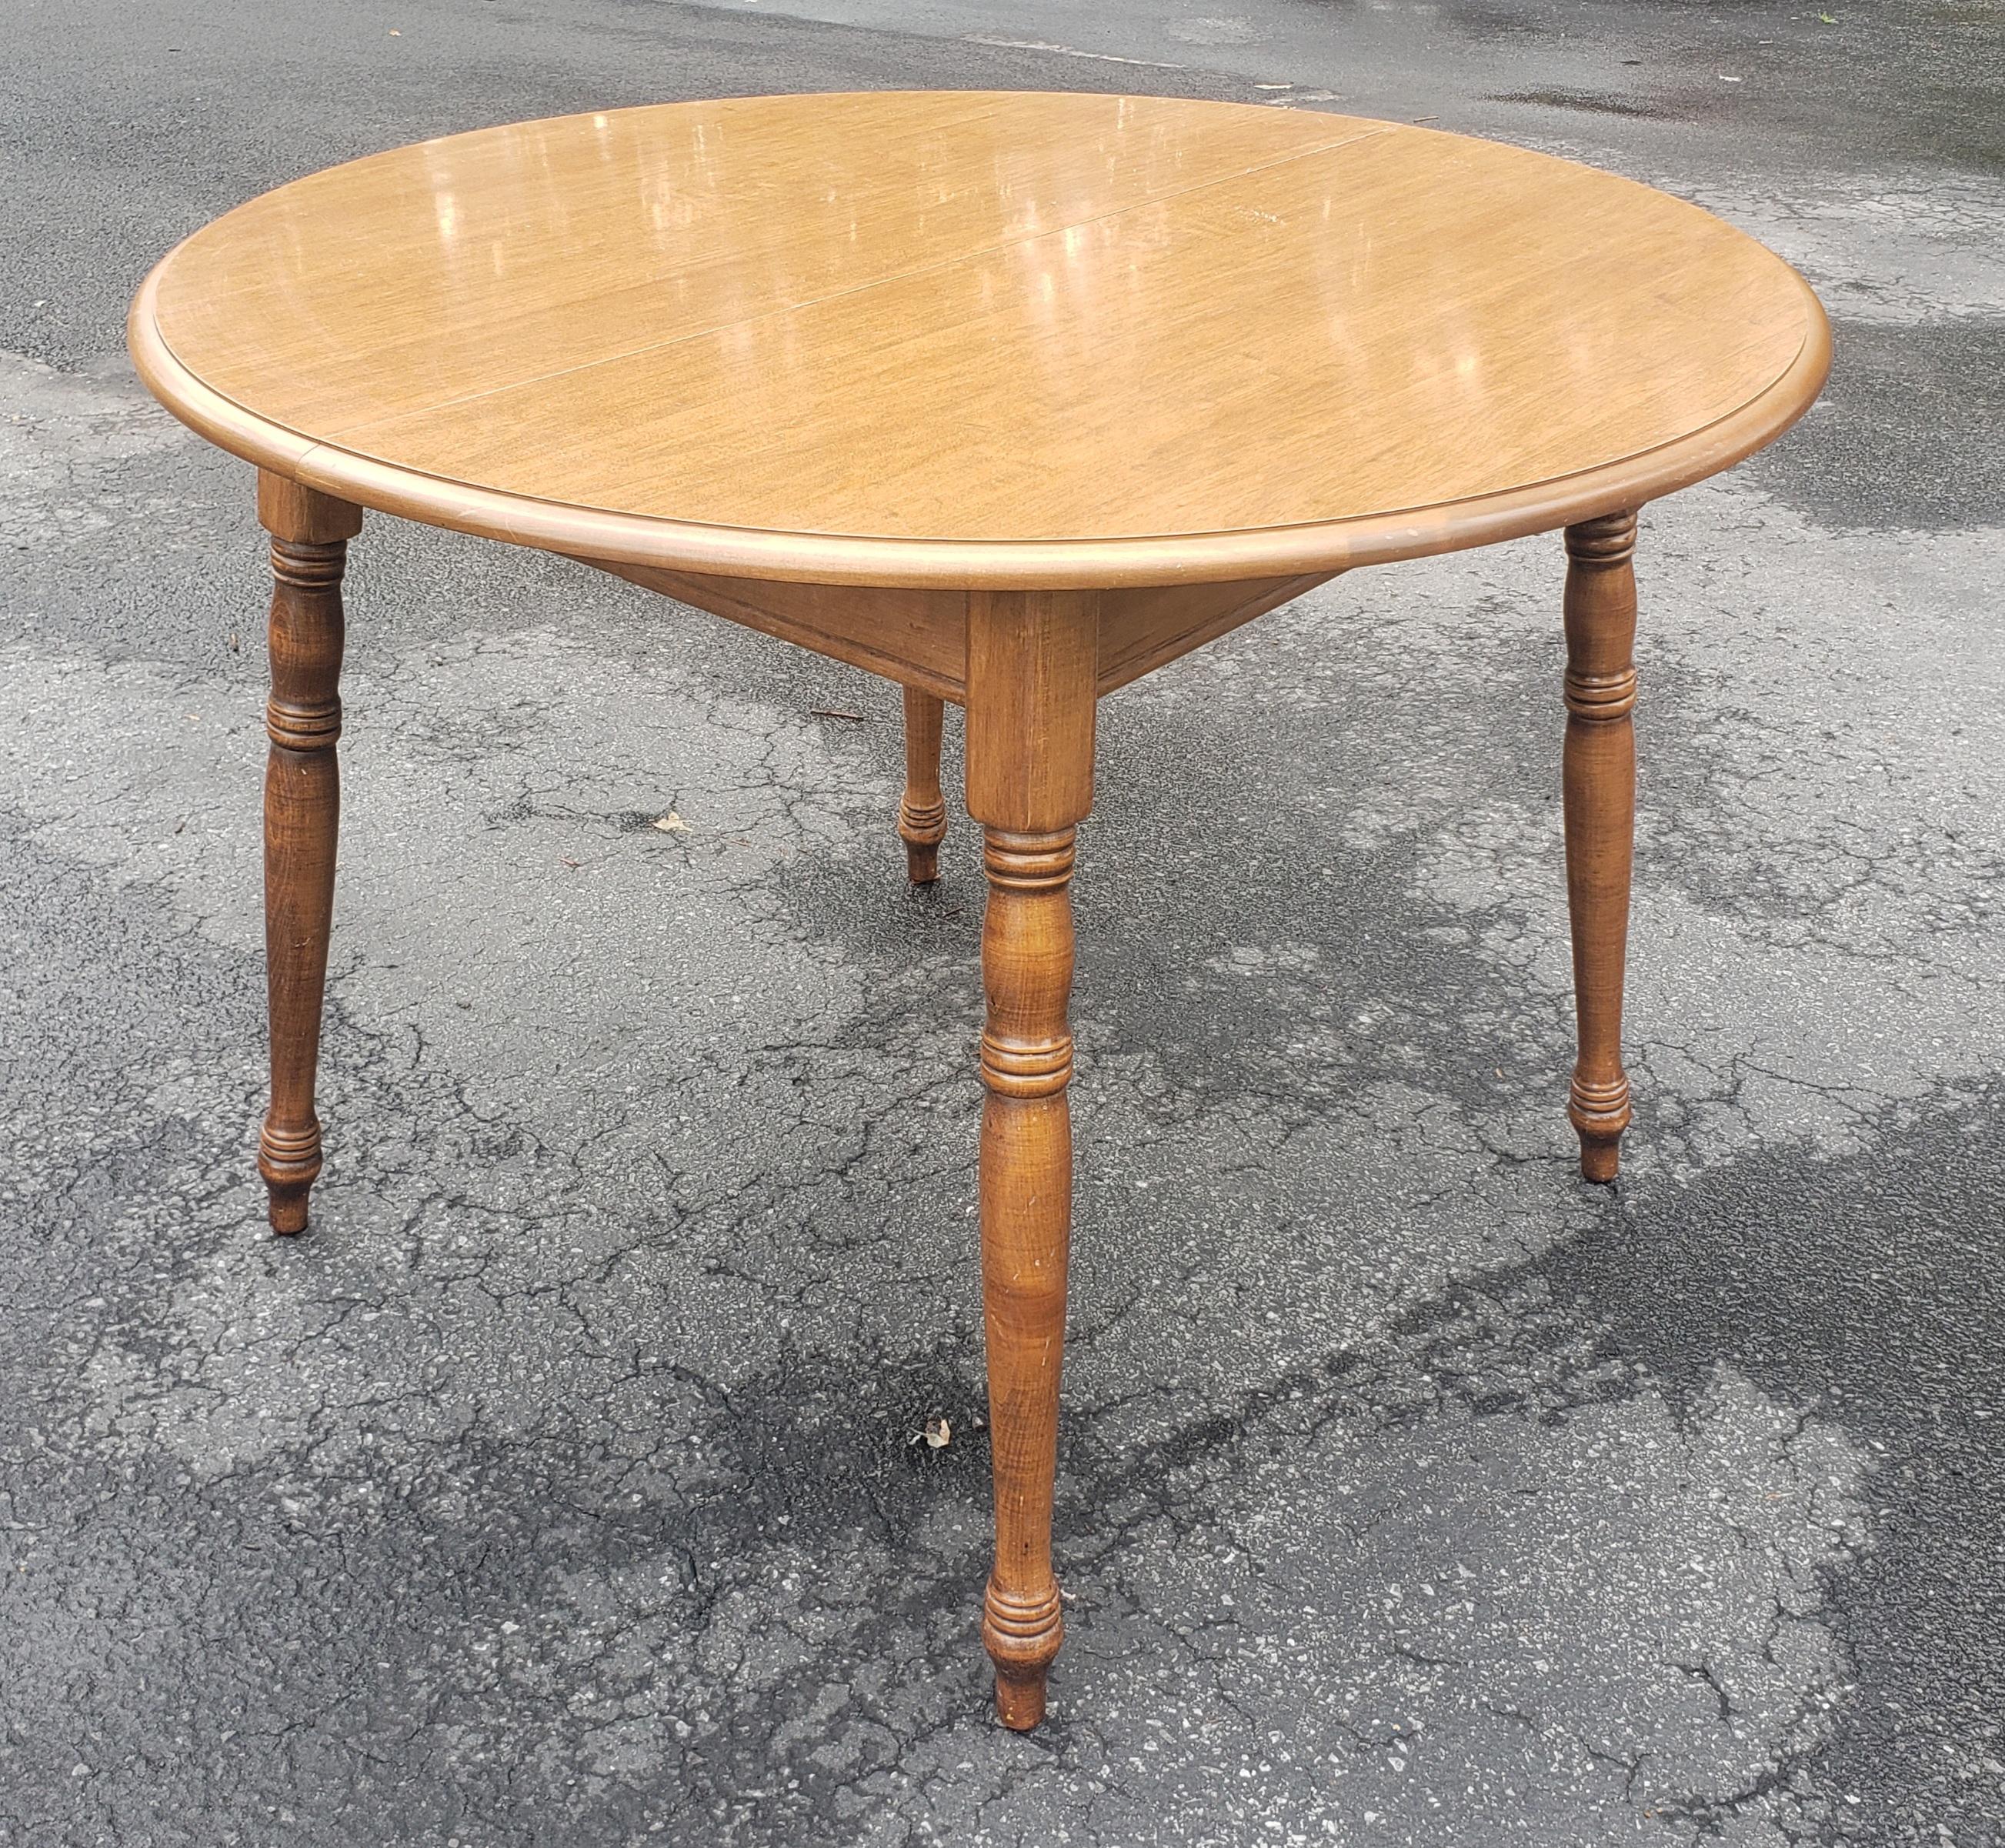 American Colonial Early American Style Maple Small Dining or Kitchen Table For Sale